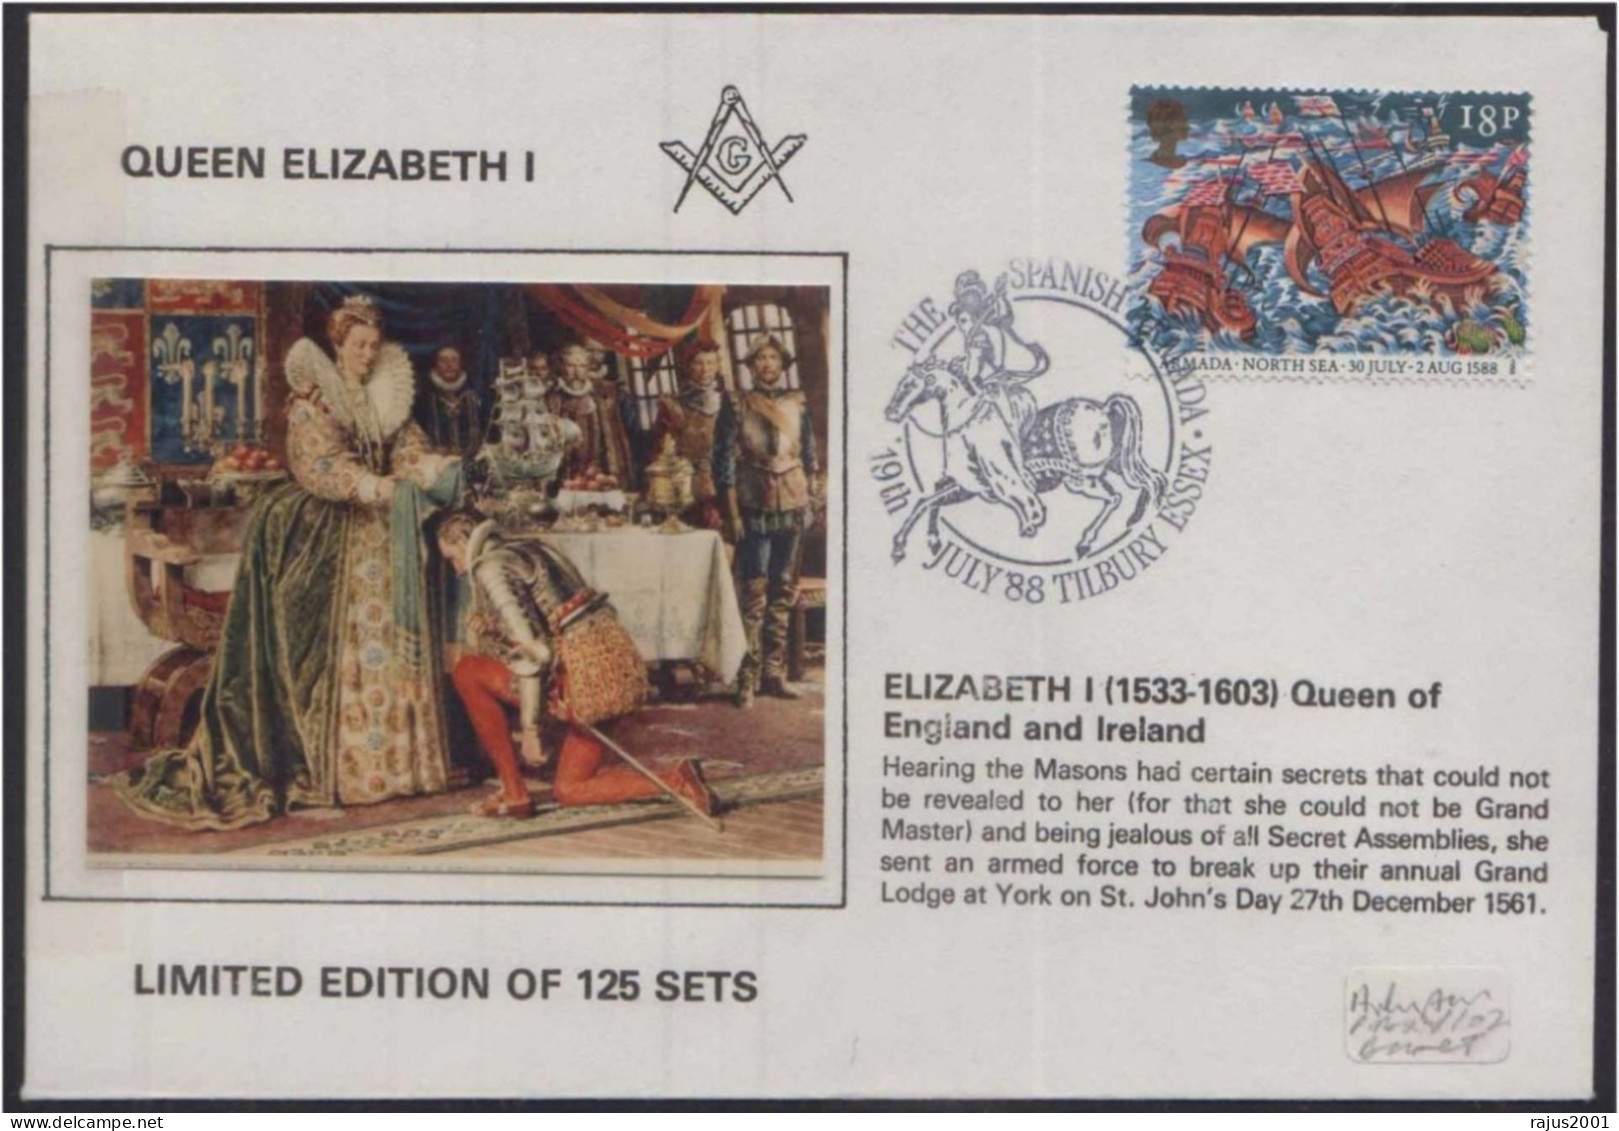 Queen Elizabeth I Sent Armed Forces To Break Masonic Meeting At Grand Lodge At York Freemasonry Limited Edition Cover - Freimaurerei